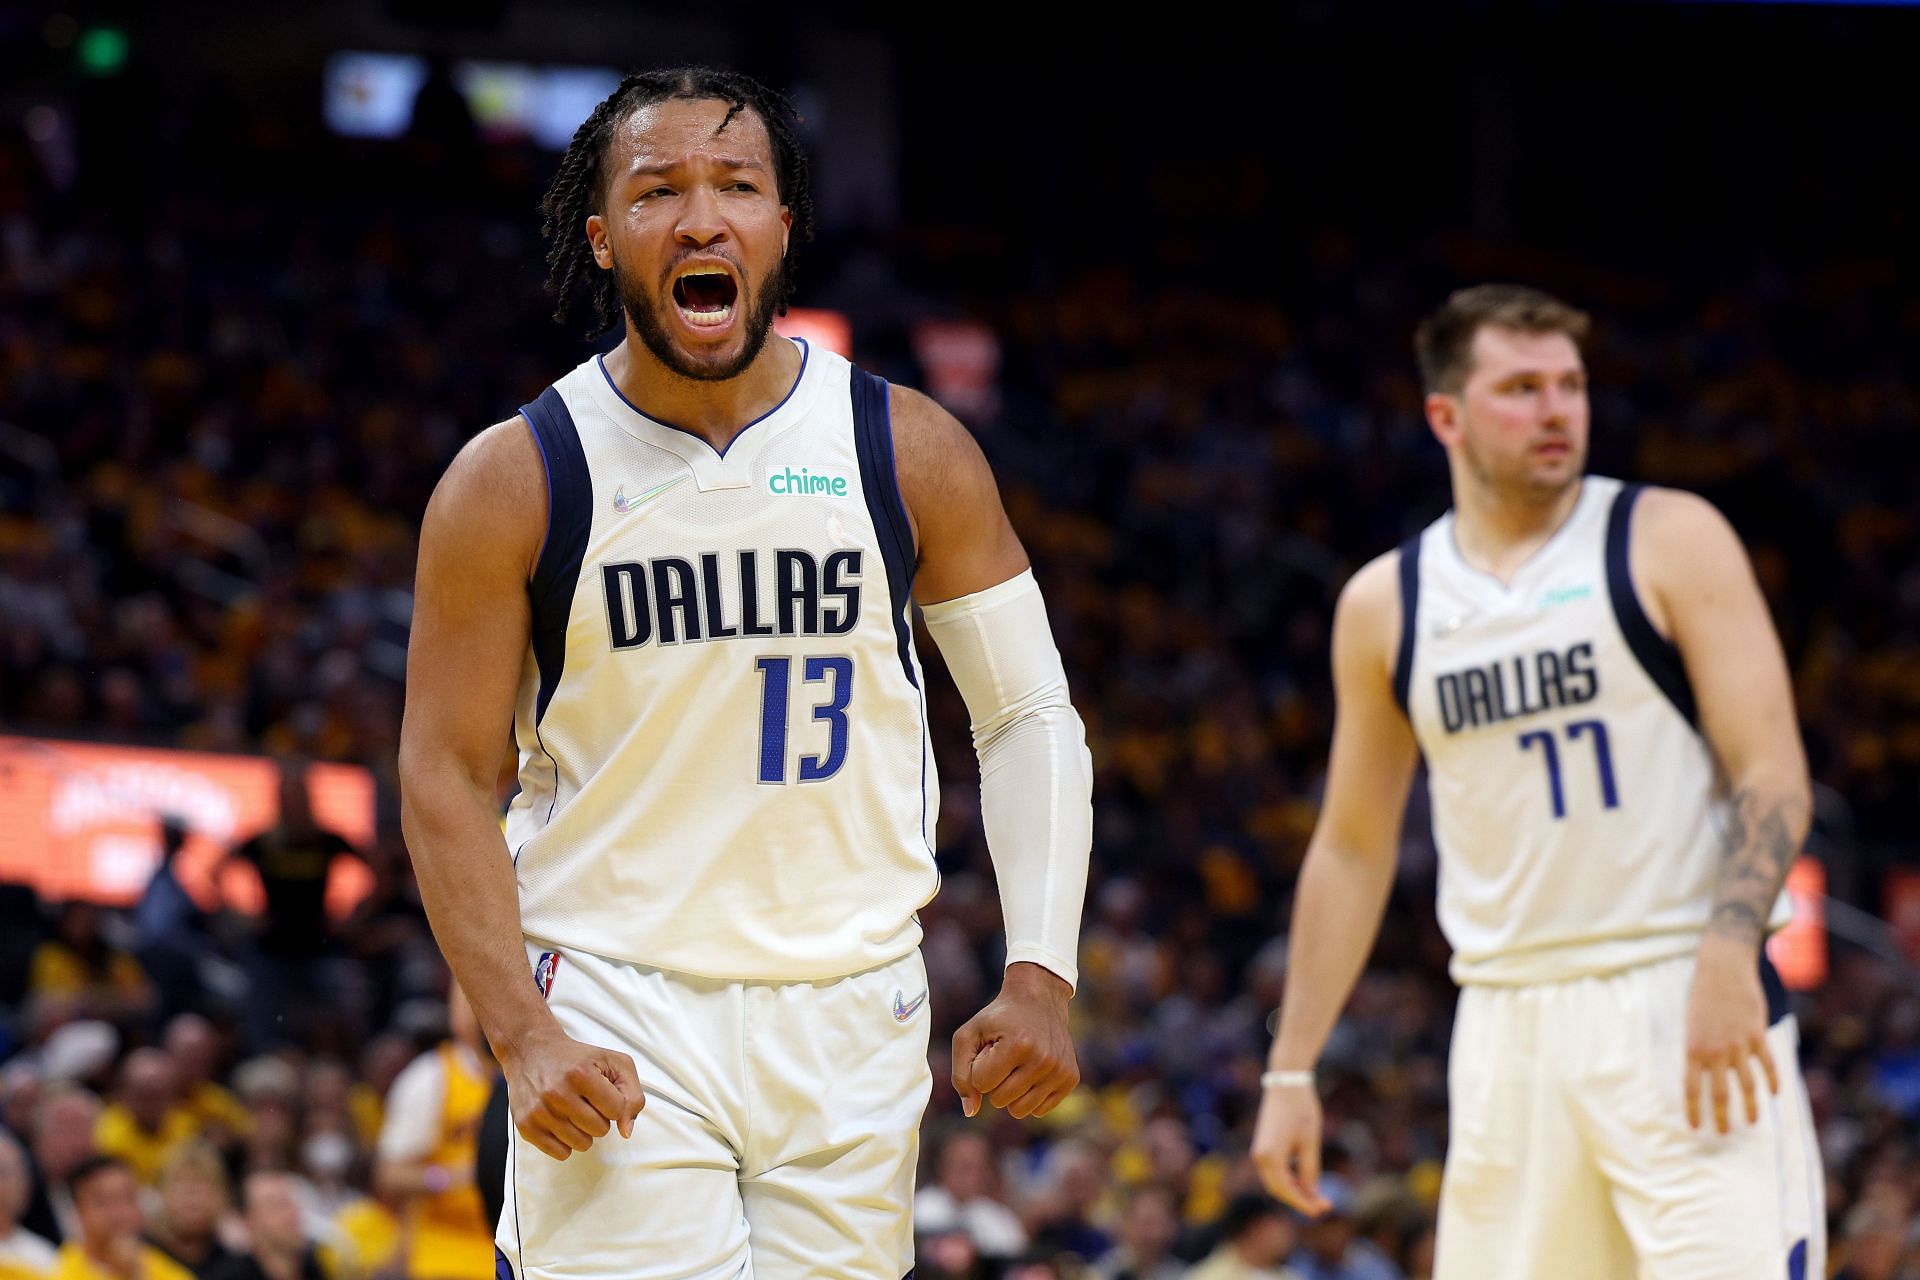 Jalen Brunson will be looking to continue taking his career towards an upward trajectory with the New York Knicks